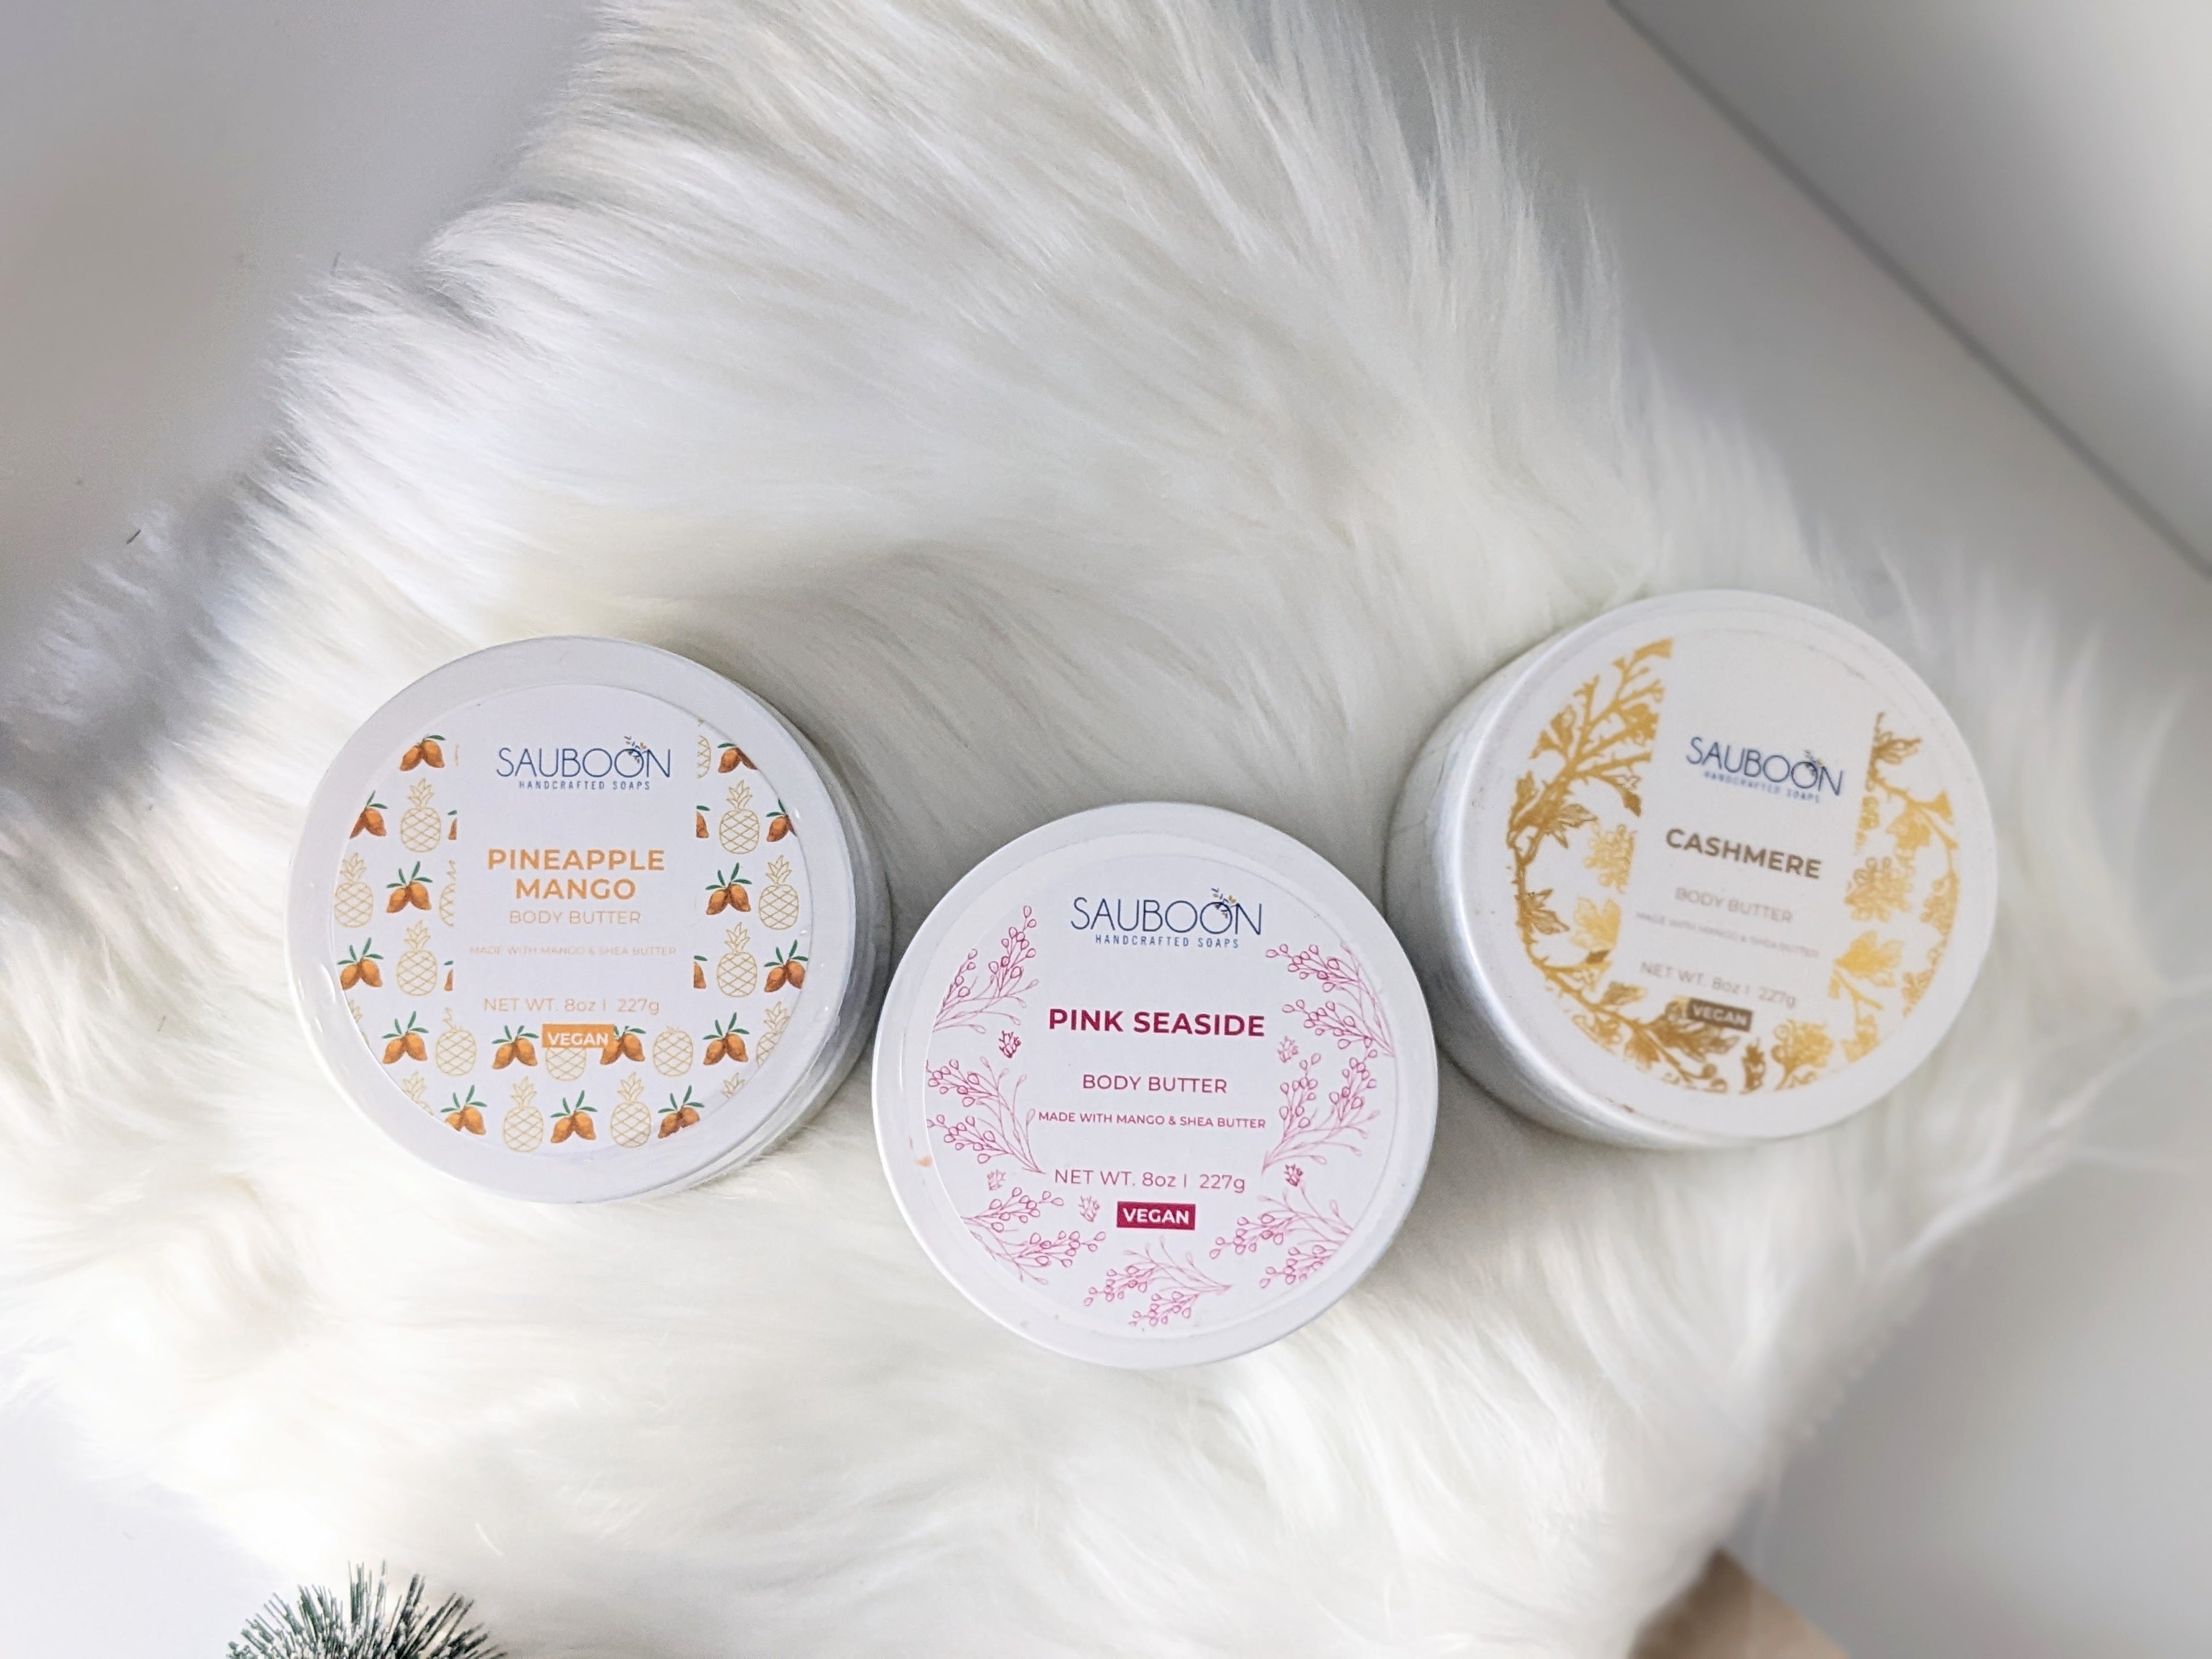 Body butters are rich luxurious moisturizing cream, made with Mango and Shea butters.  Handmade in small batches in Albuquerque USA.  They are non-greasy, fast absorbing body butters that will give your skin relief.  .